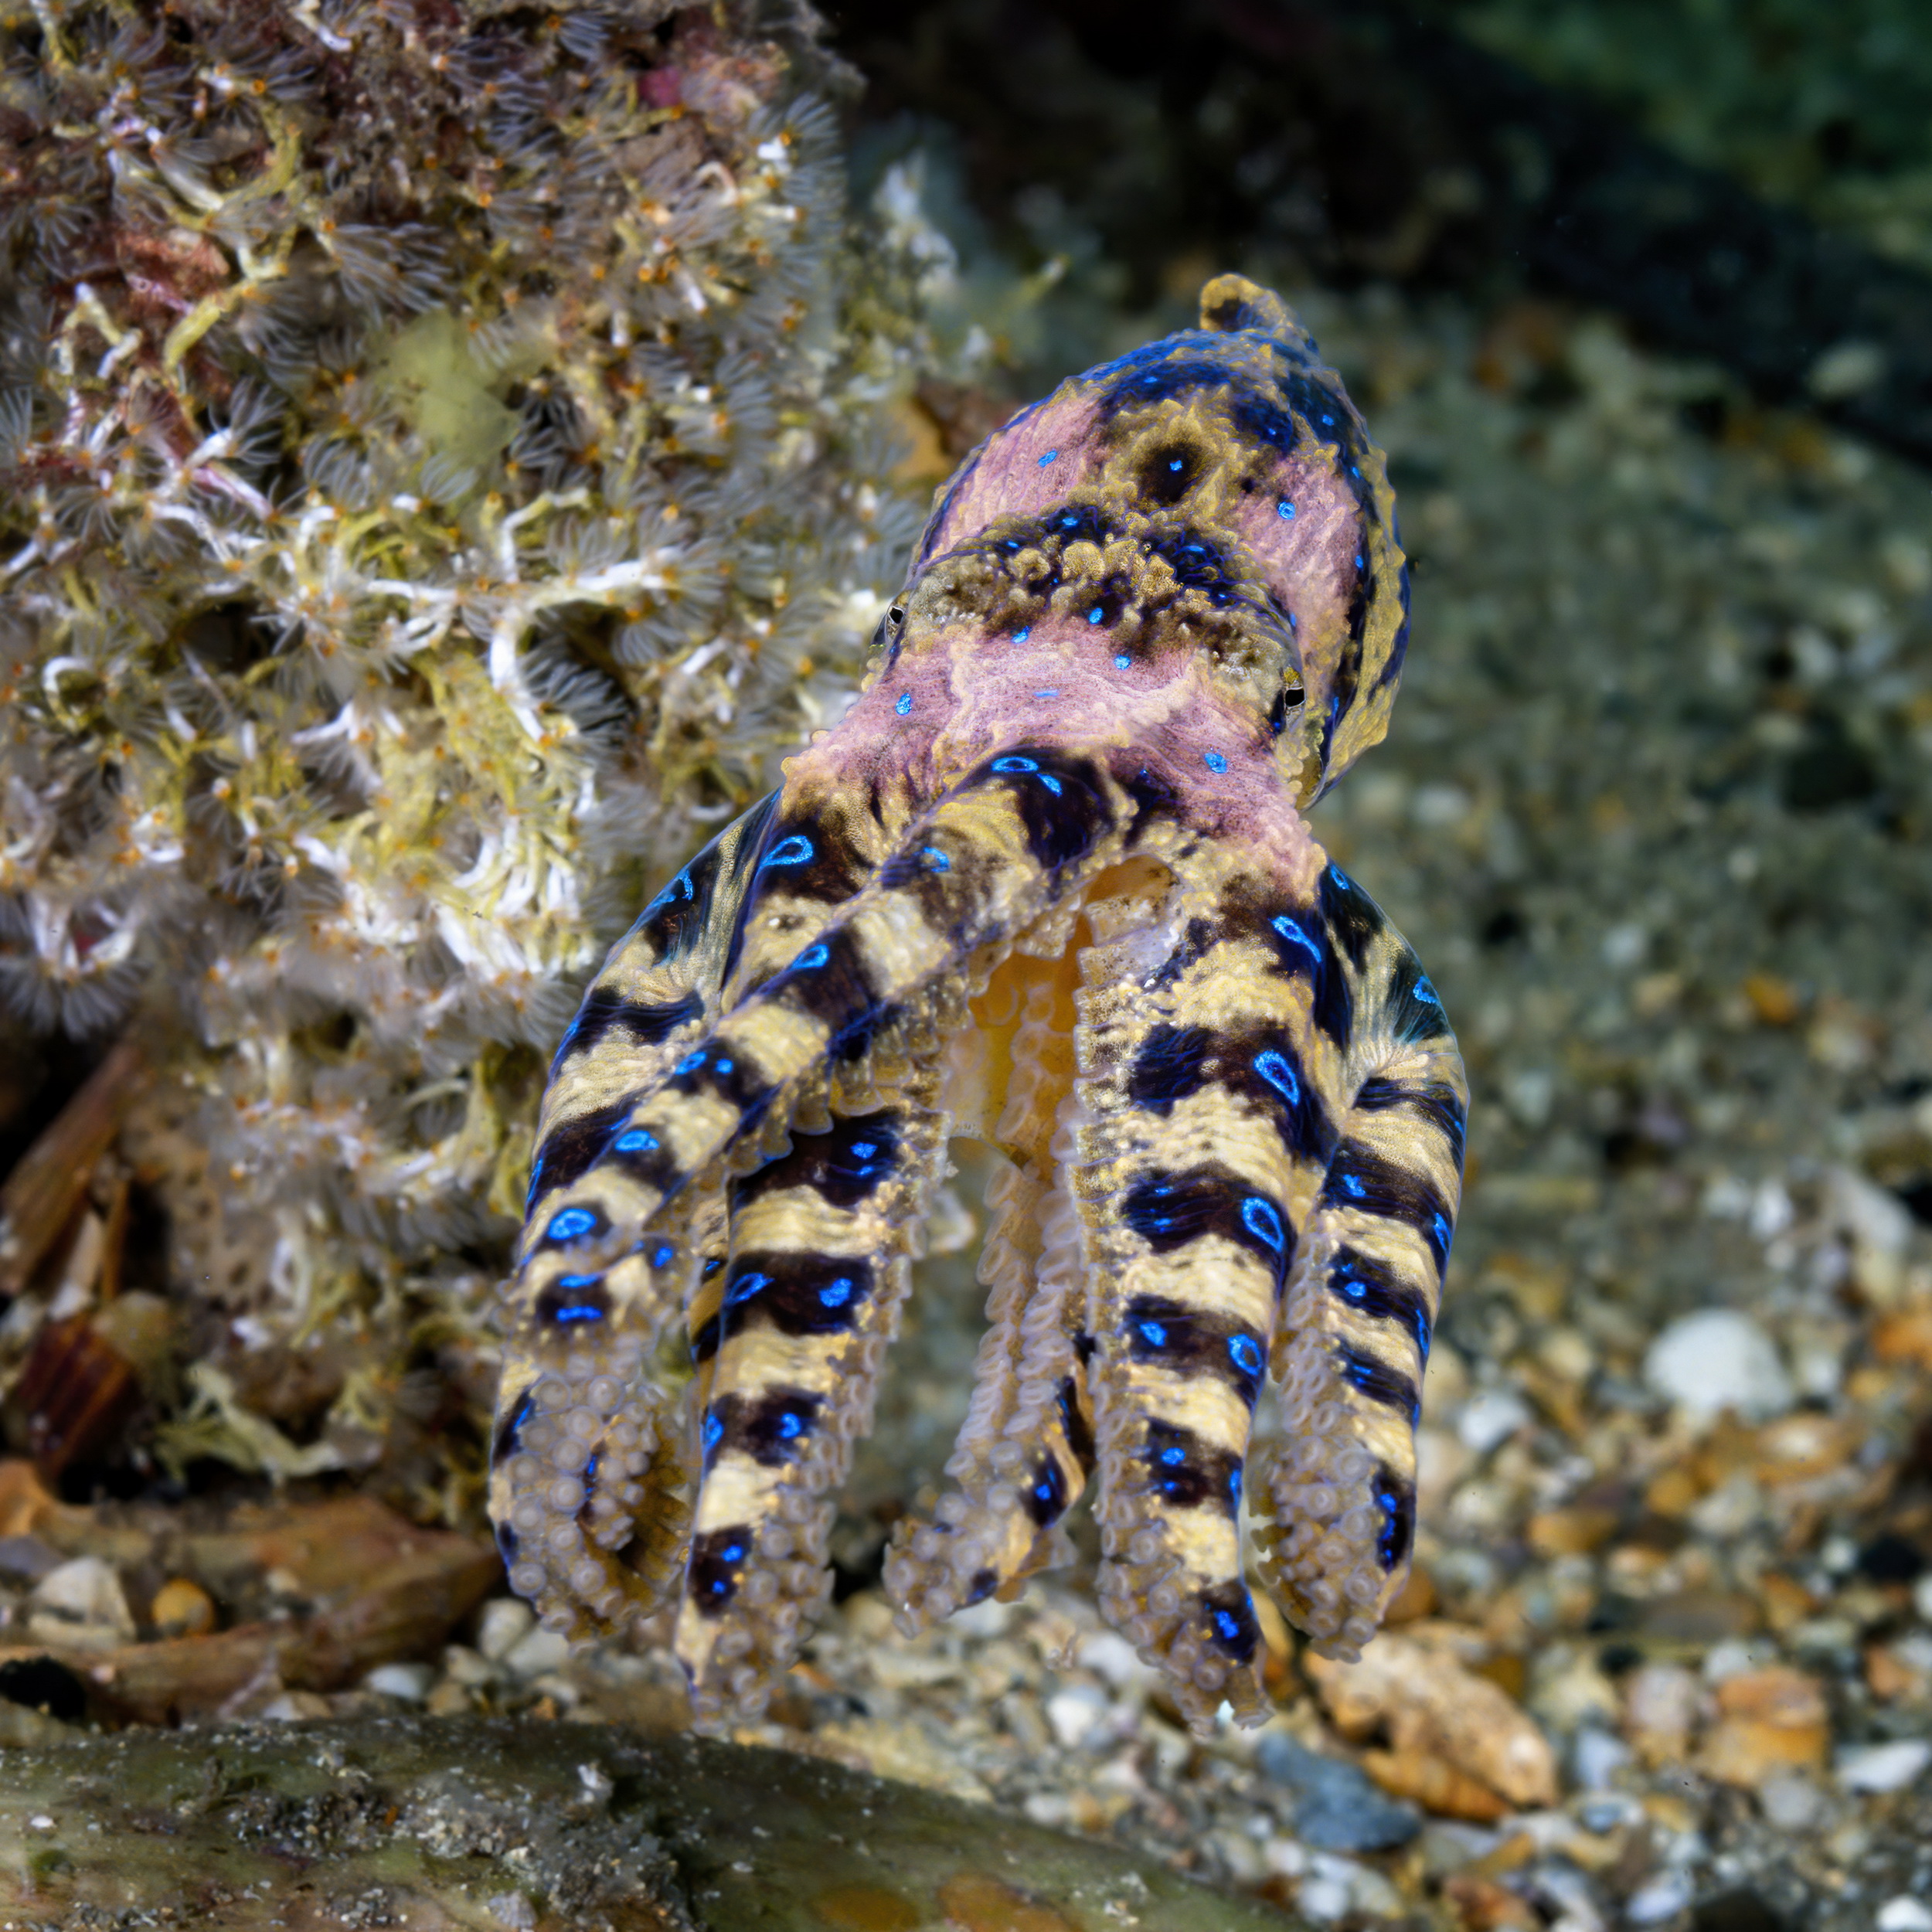 Blue-ringed octopus, Edithburgh Jetty, South Australia. Photo by Don Silcock.